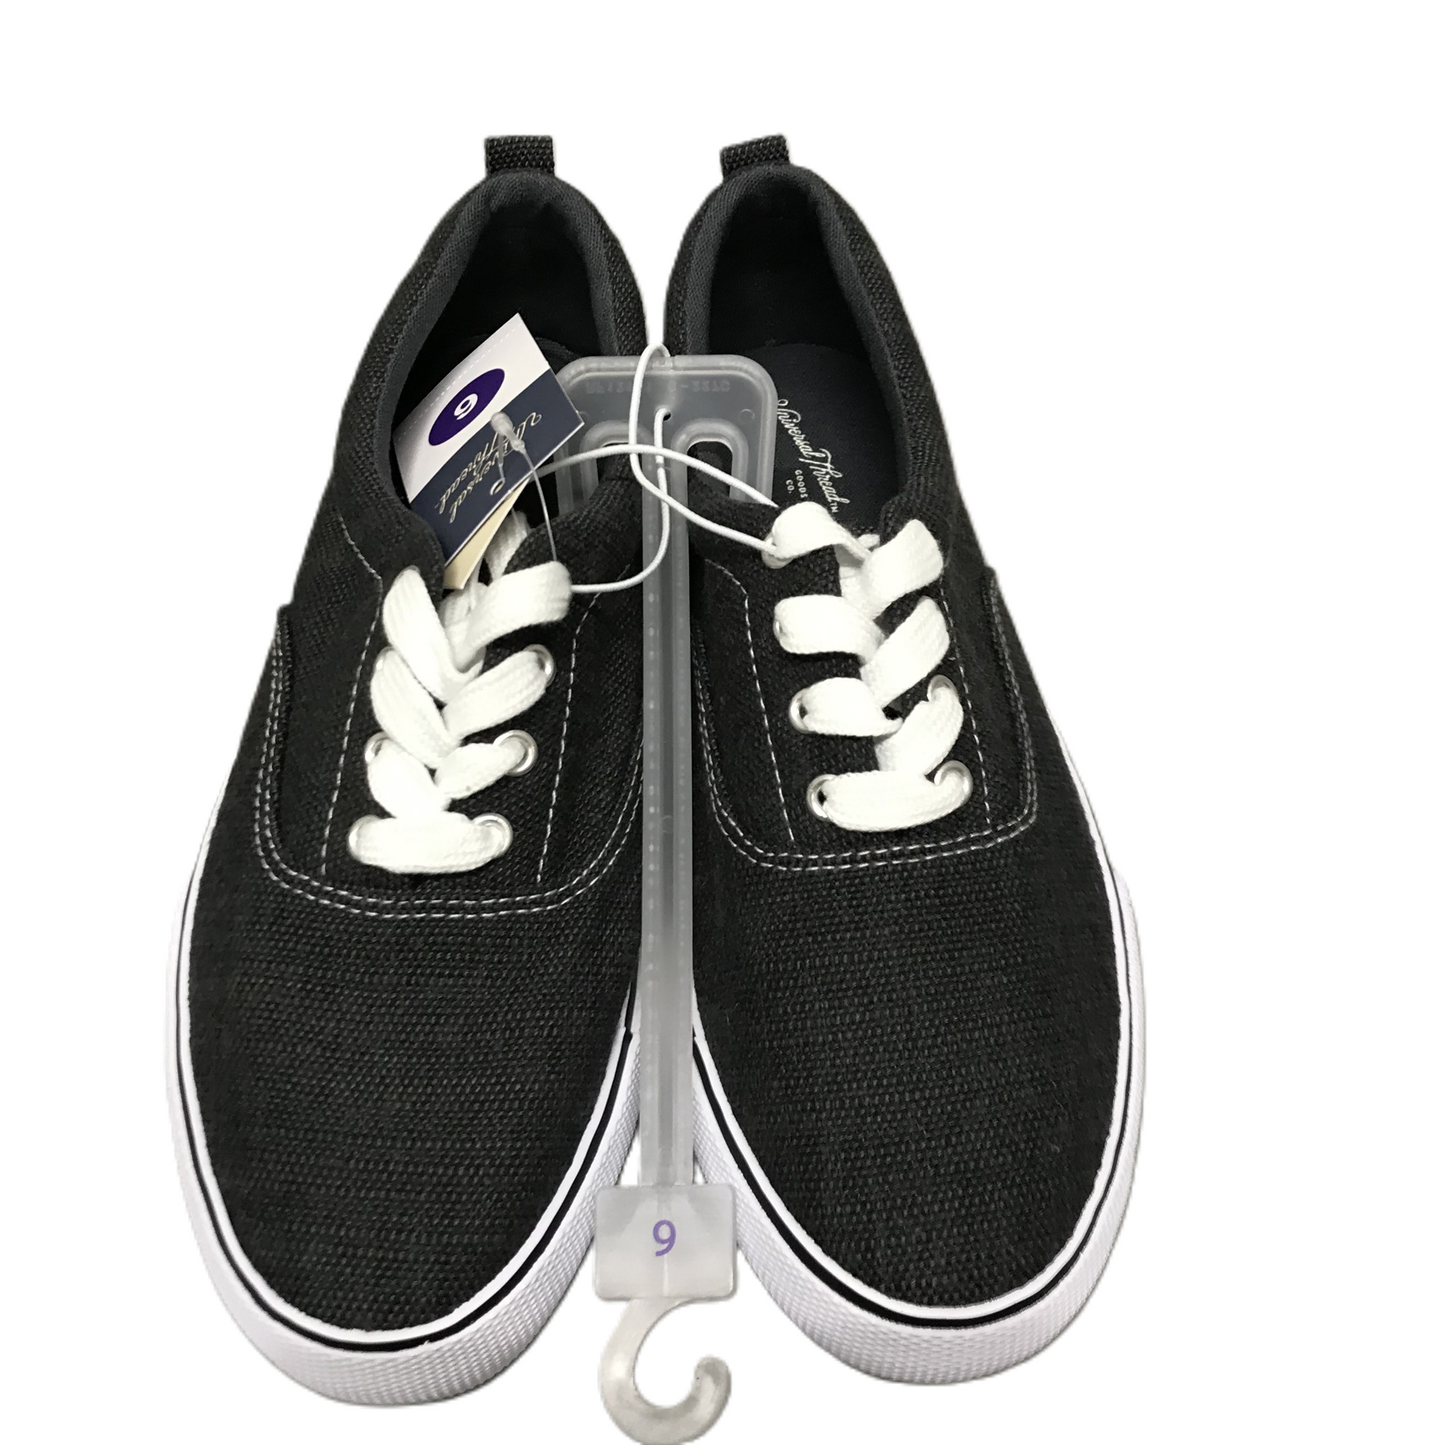 Grey Shoes Sneakers By Universal Thread, Size: 6